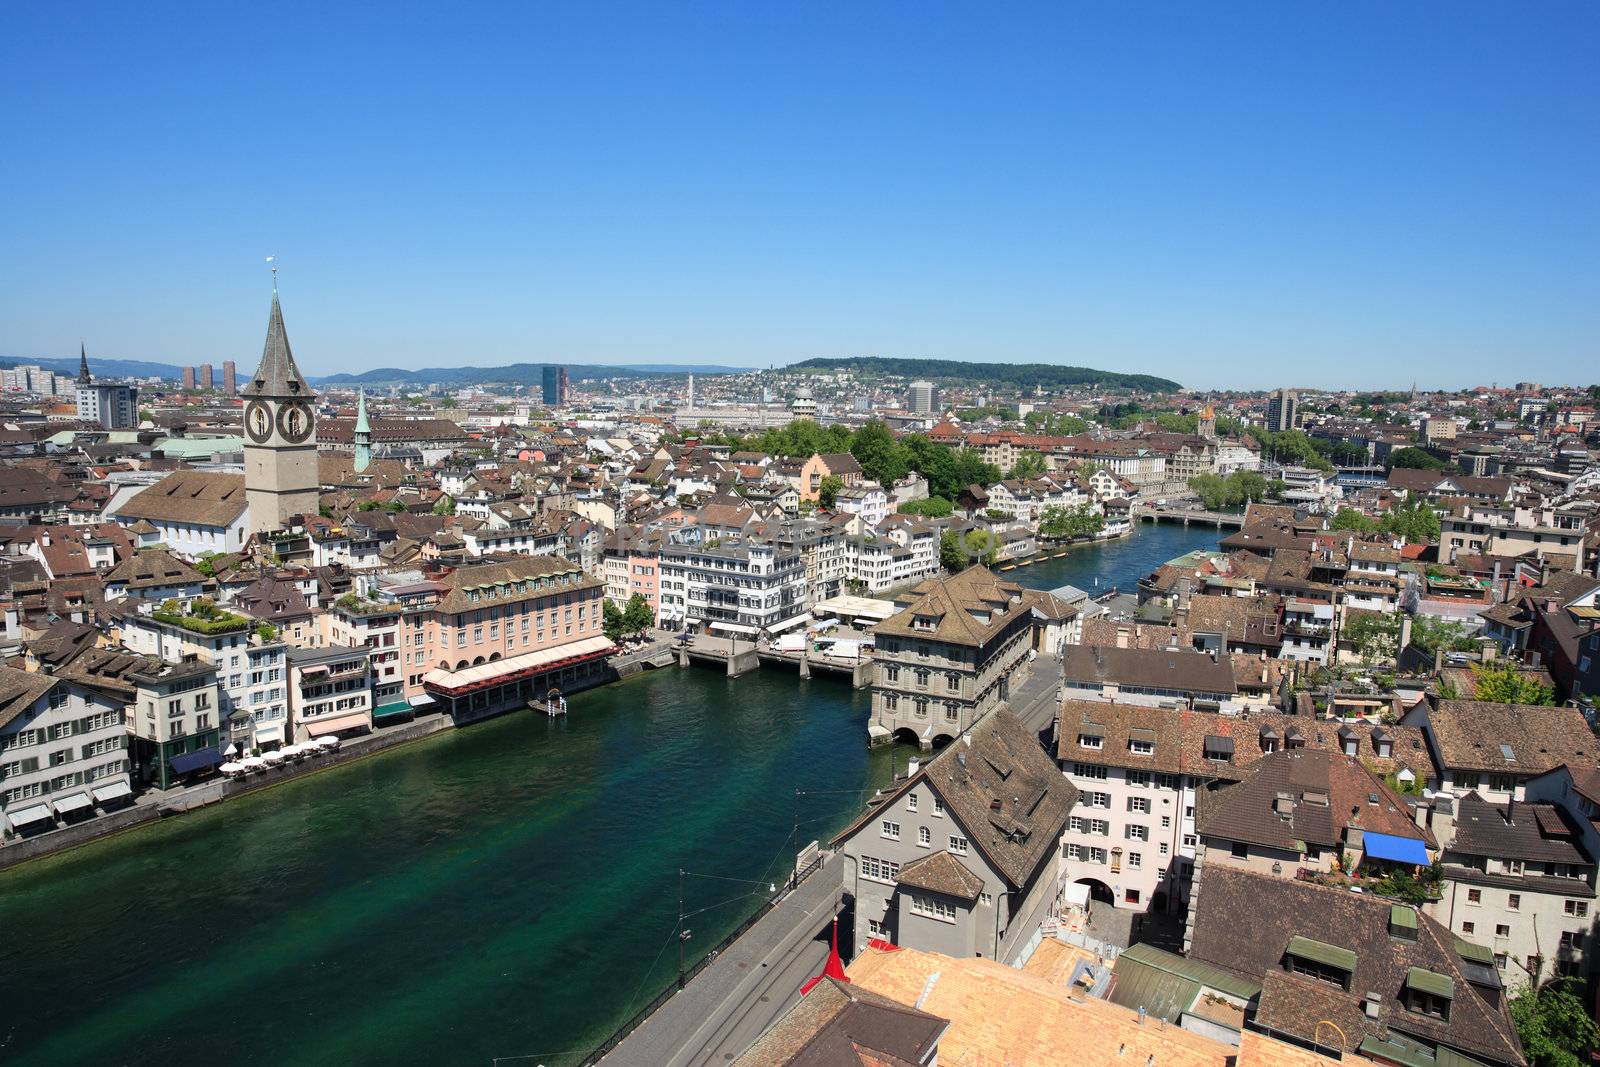 Cityscape of Zurich, Switzerland.  Taken from a church tower overlooking the Limmat River.